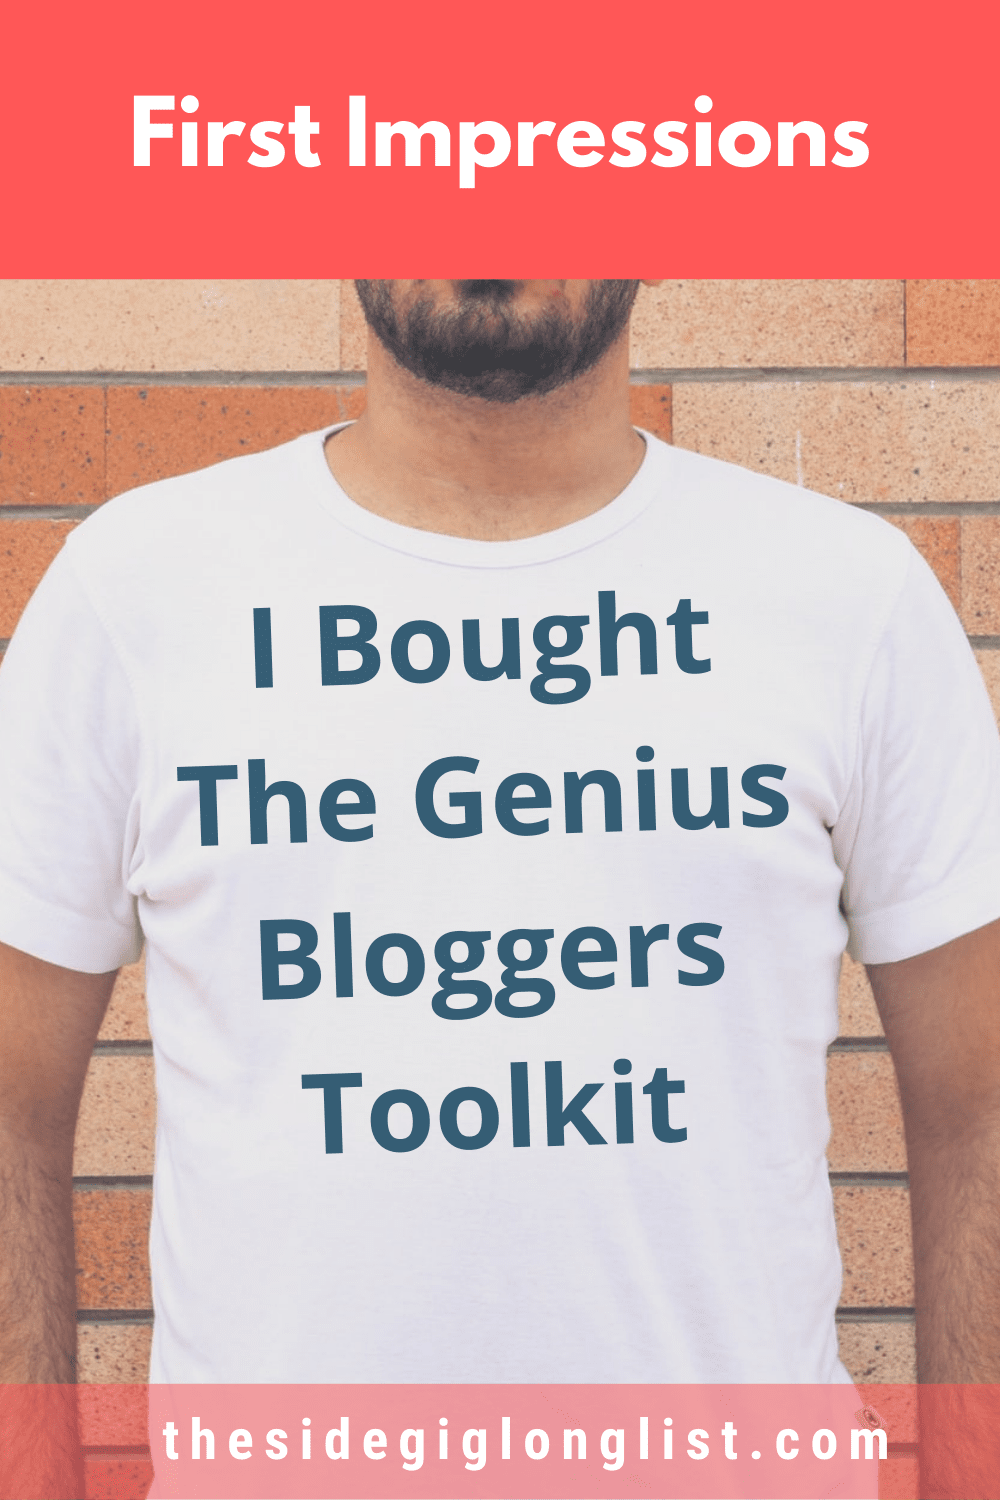 I Bought the Genius Bloggers Toolkit